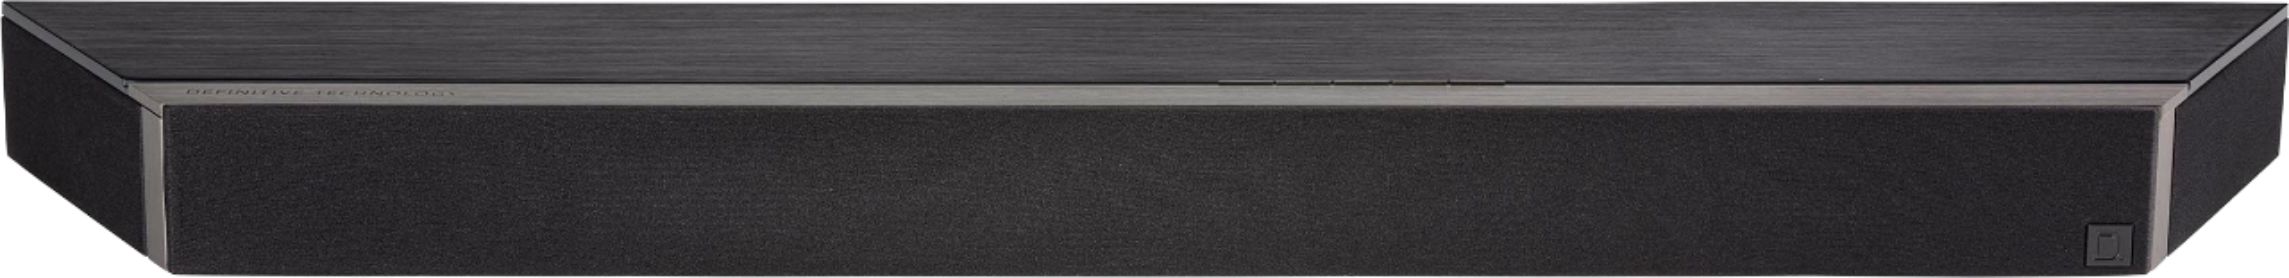 Left View: Definitive Technology - 4.1-Channel Studio 3D Mini Soundbar with Wireless Subwoofer, Dolby Atmos/DTS:X, HEOS Wireless Audio. - Black